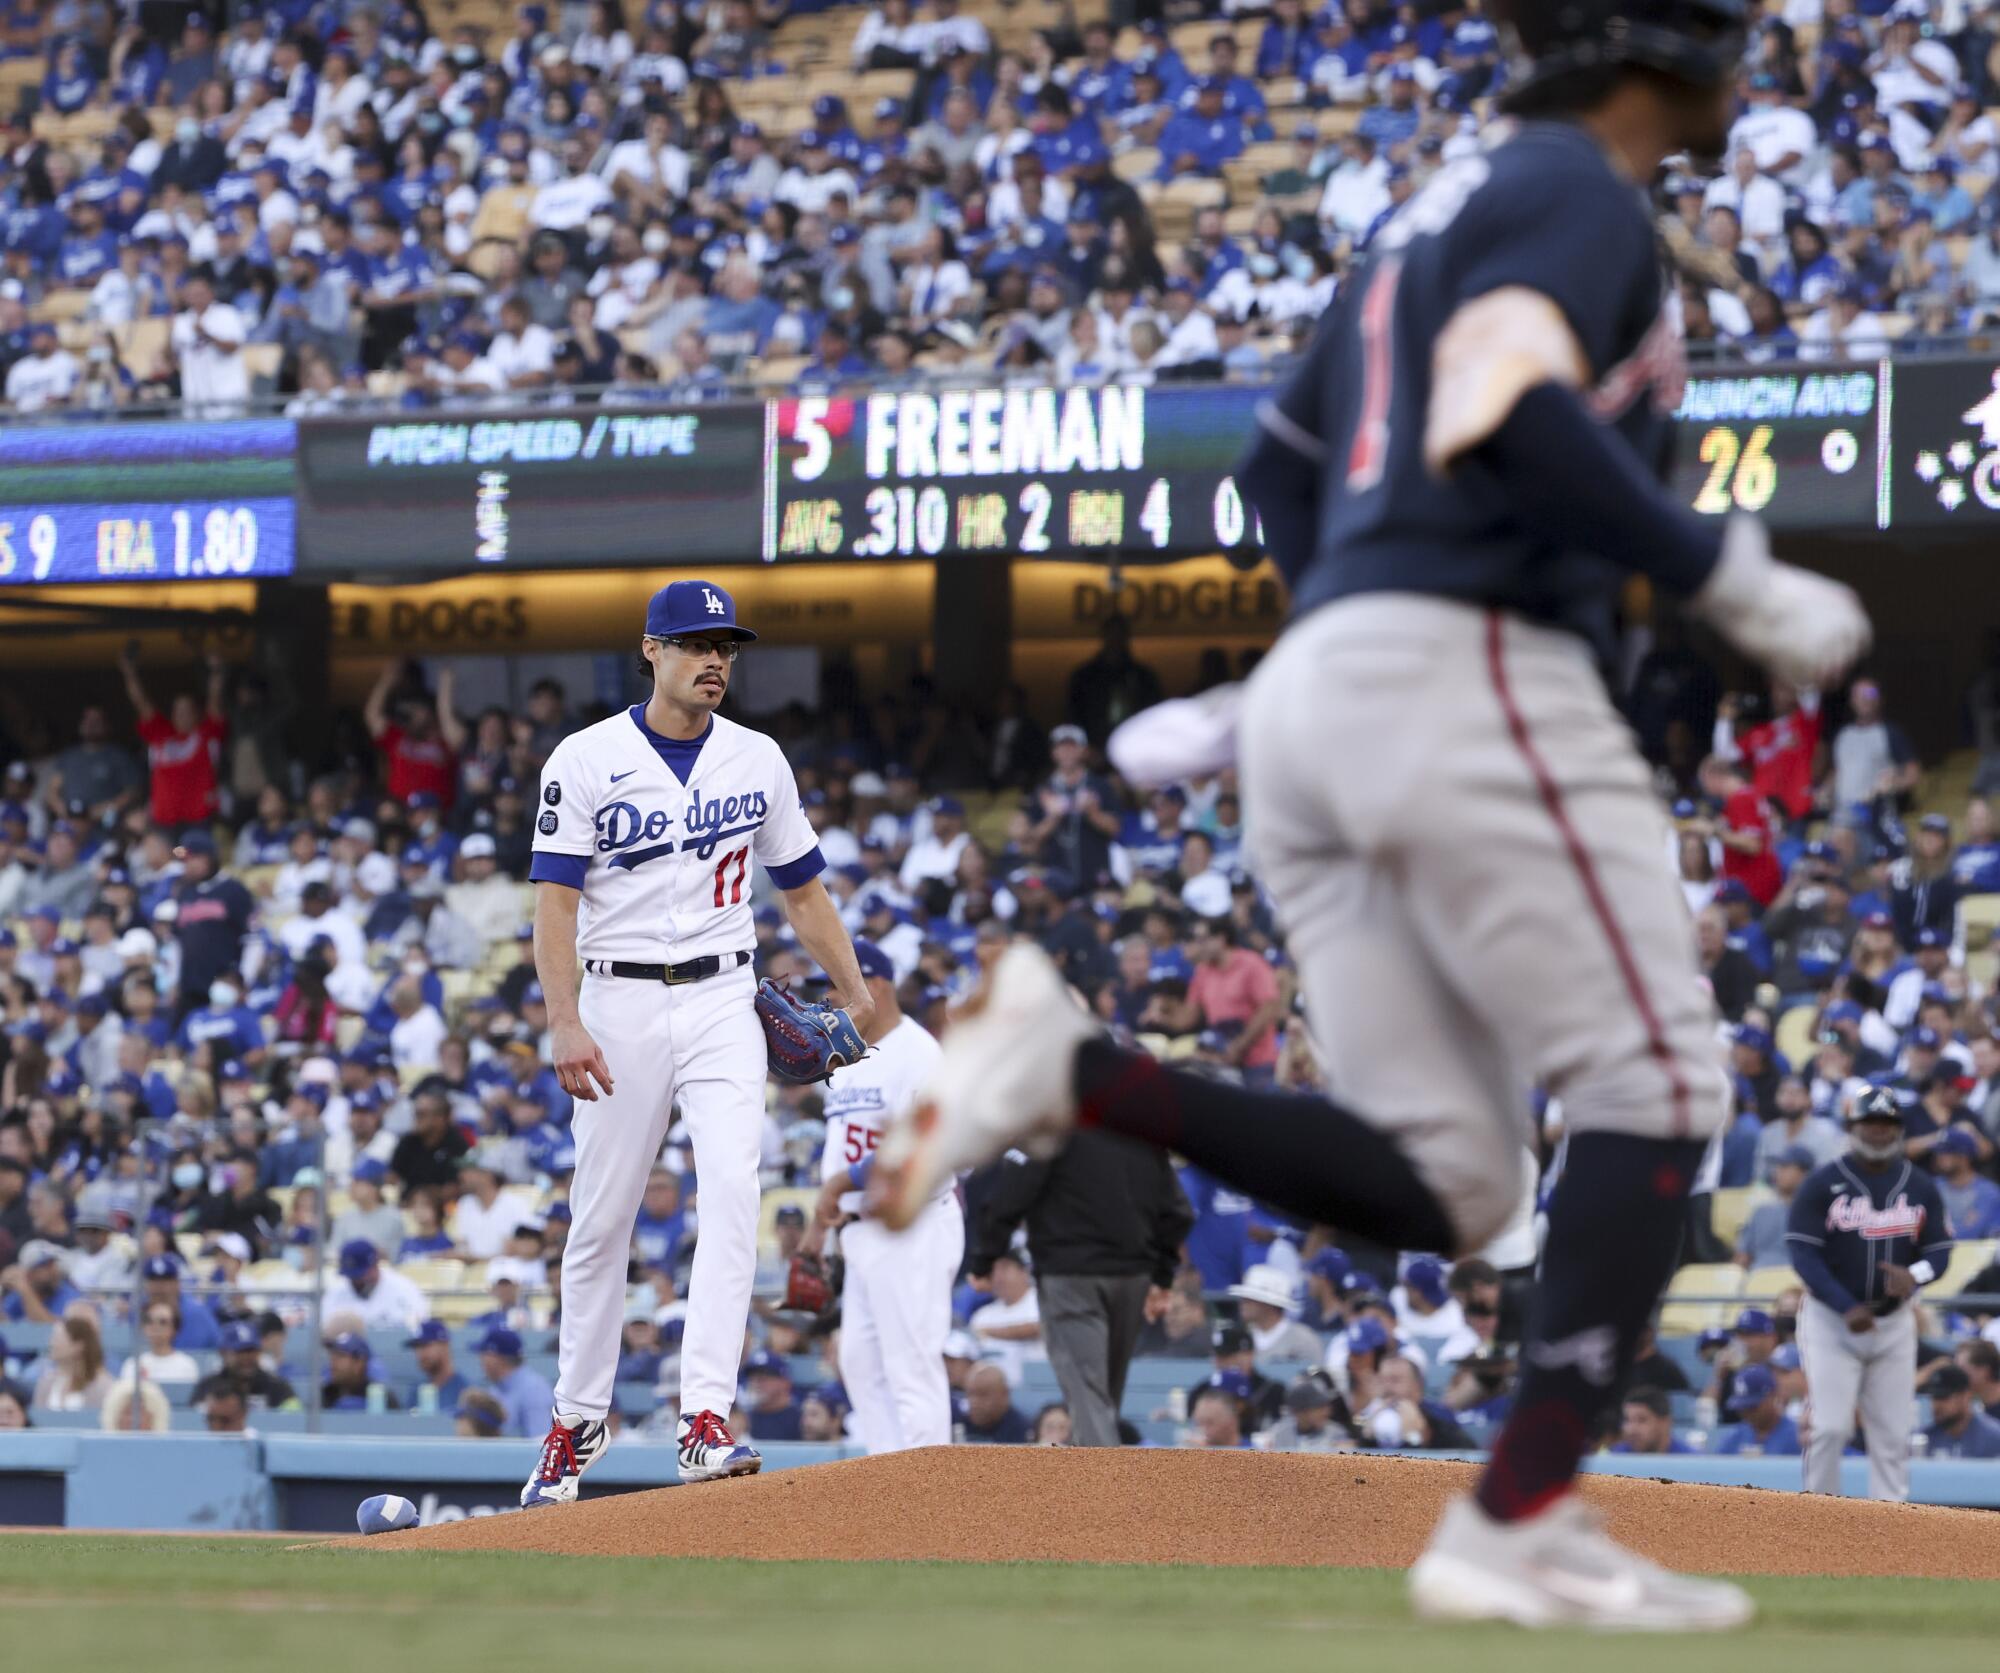  Dodgers starting pitcher Joe Kelly reacts as Atlanta Braves' Ozzie Albies rounds the bases.